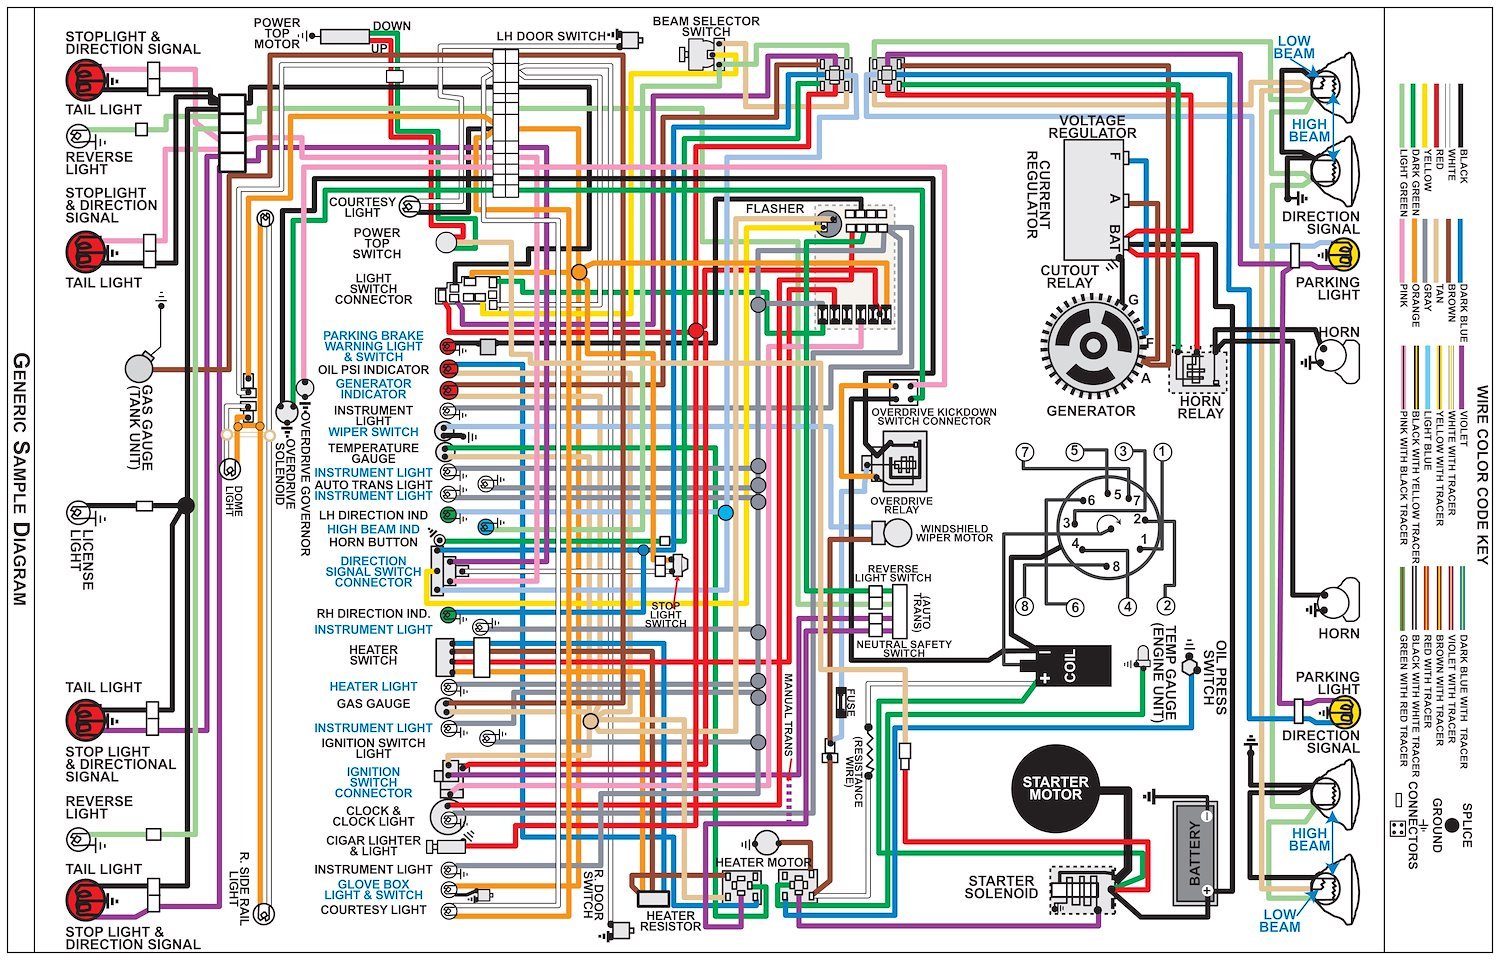 Wiring Diagram for 1968 Plymouth Barracuda, 11 in x 17 in., Laminated